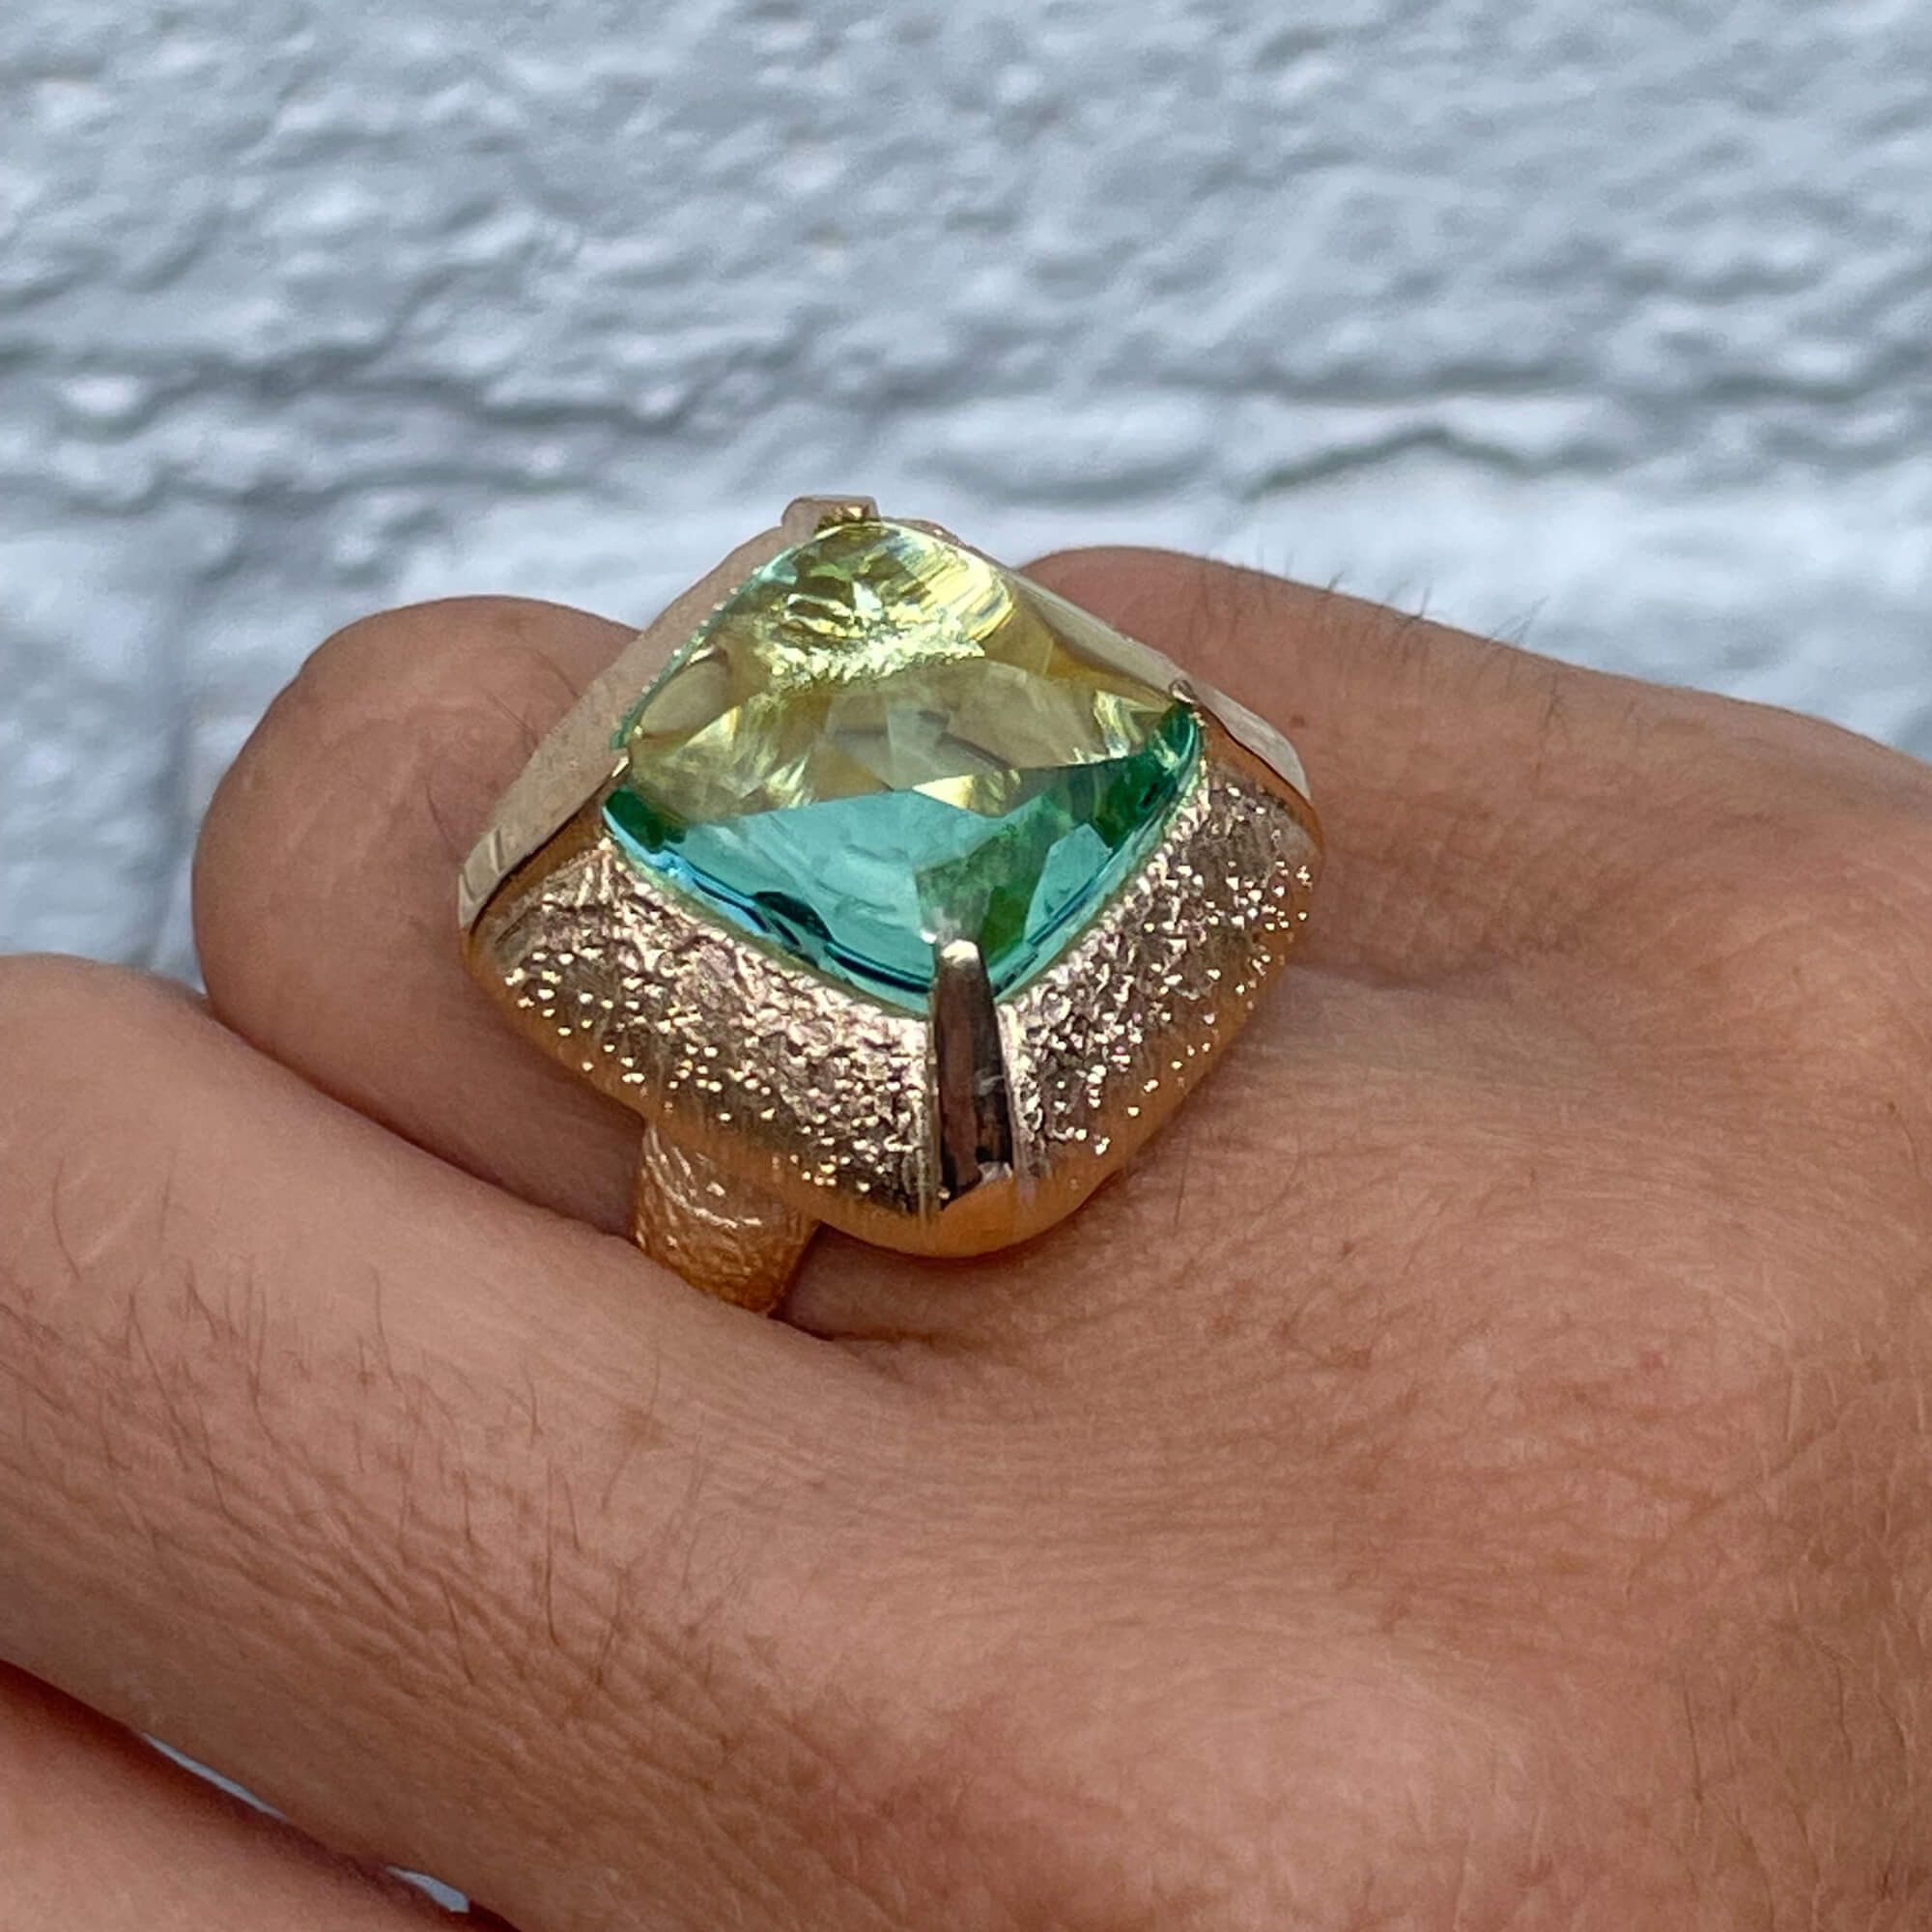 Gold-plated square-shaped ring with a green stone